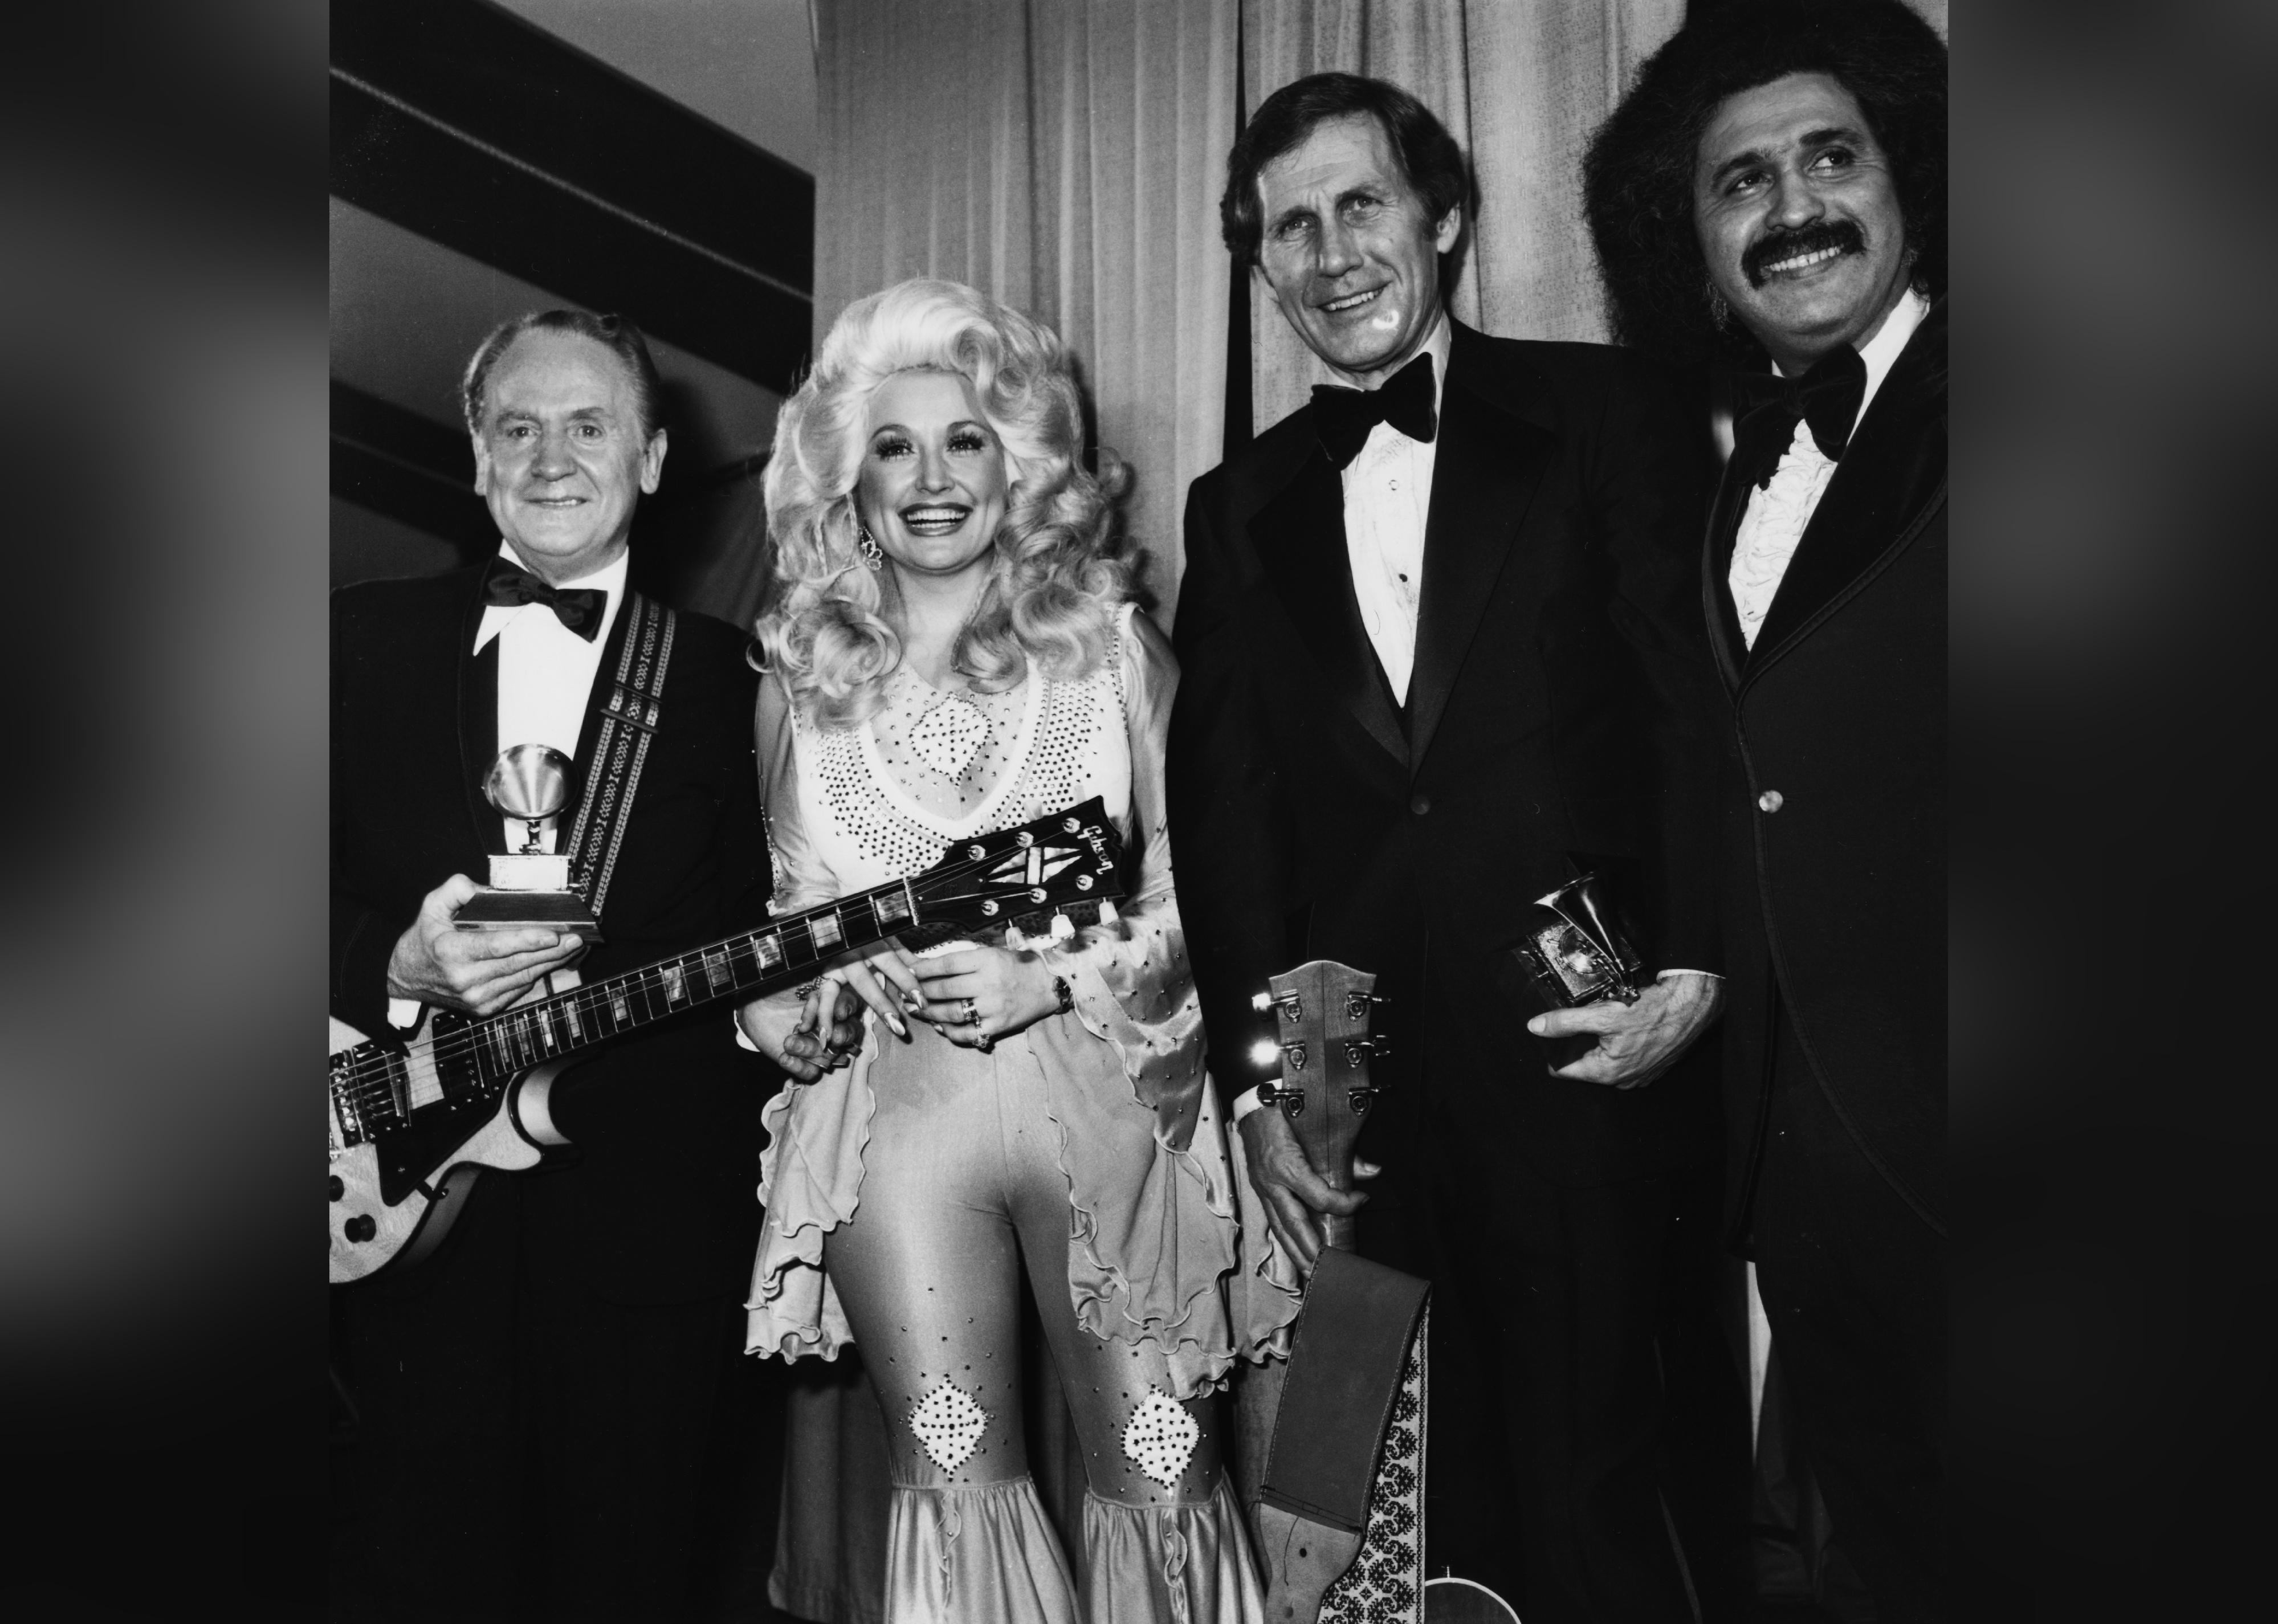 Les Paul, Dolly Parton, Chet Atkins, and Freddie Fender, posing together at the Grammy Awards.